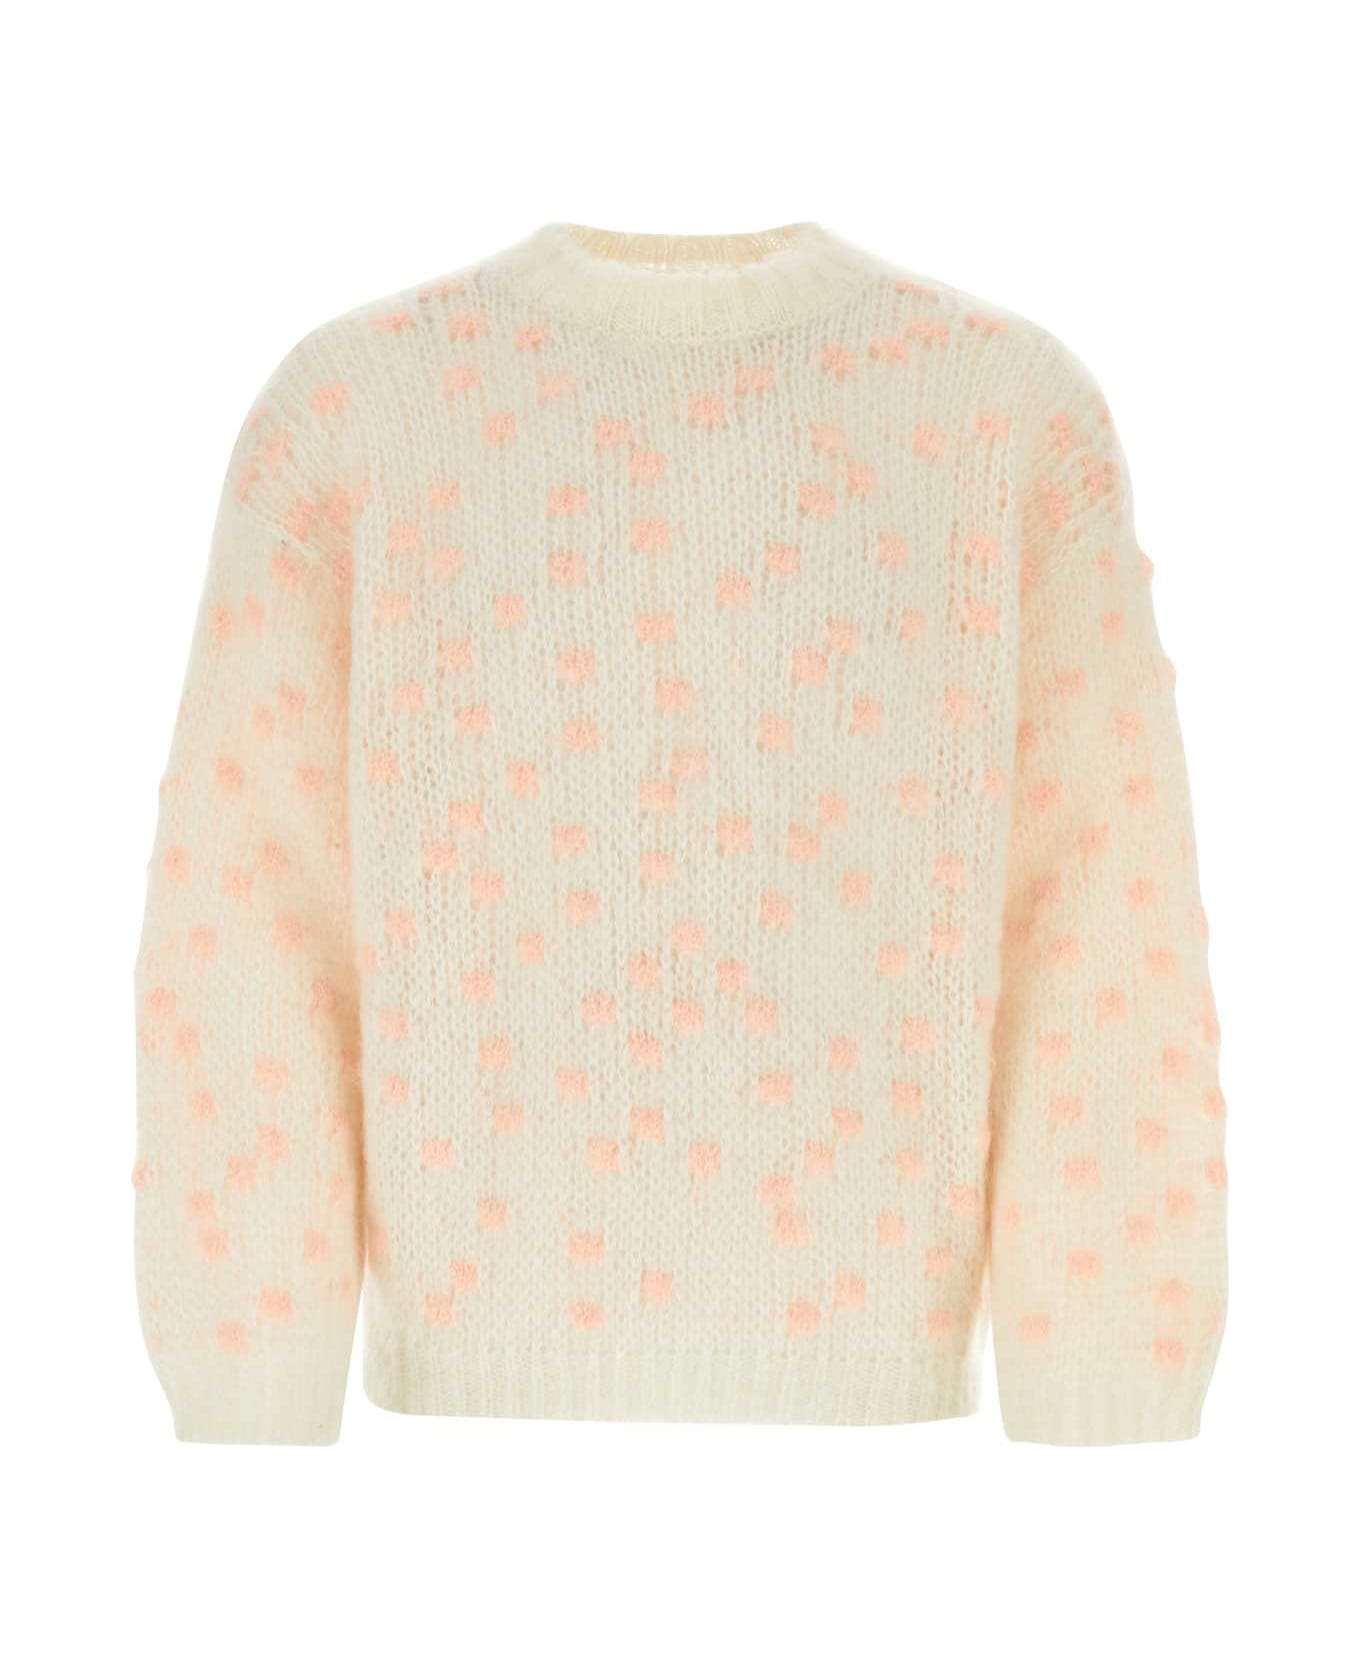 Magliano Embroidered Mohair Blend Sweater - SHYPINK